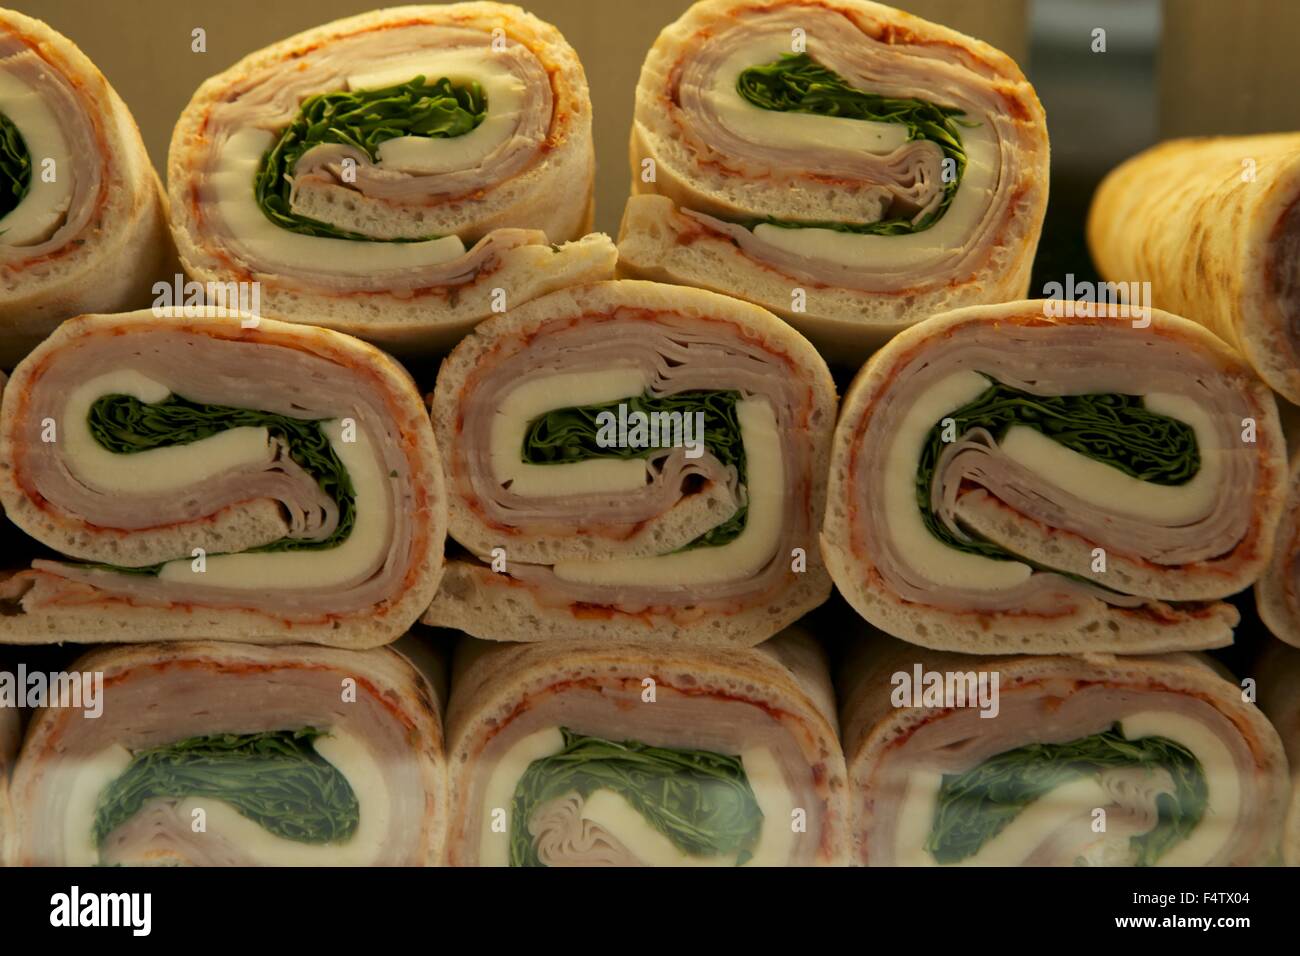 food snacks sandwiches in a display window of a cafe in Italy Venice sandwich of cheese Italian prosciutto and lettuce Stock Photo